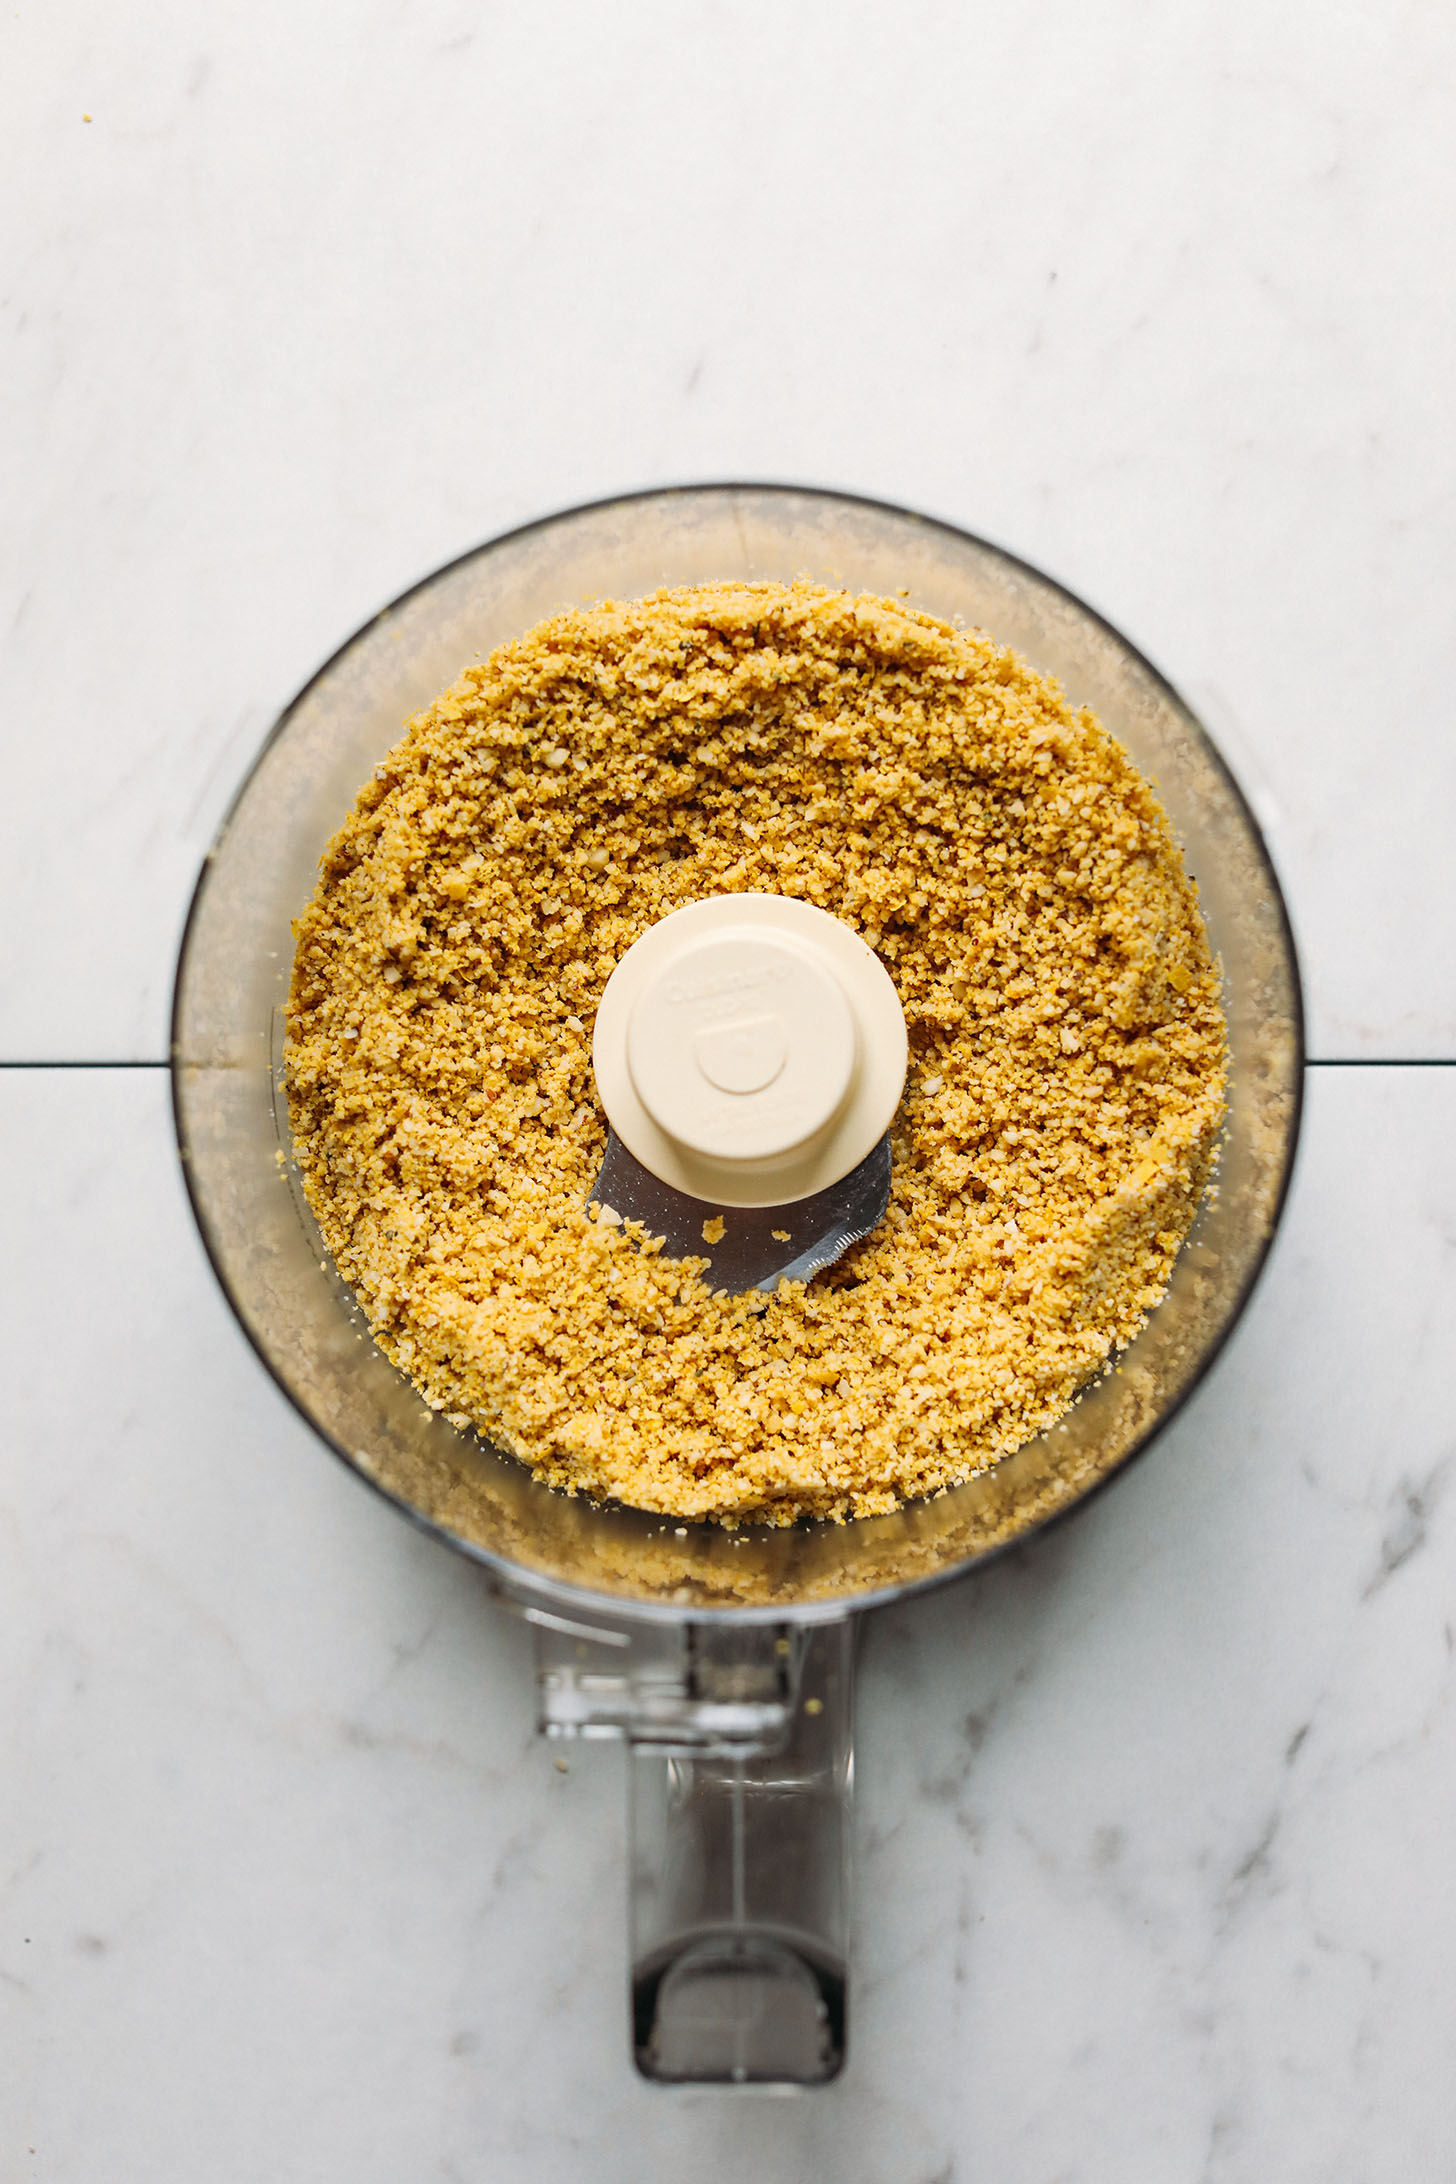 Food processor with Vegan Parmesan made from brazil nuts, hemp seeds, and nutritional yeast